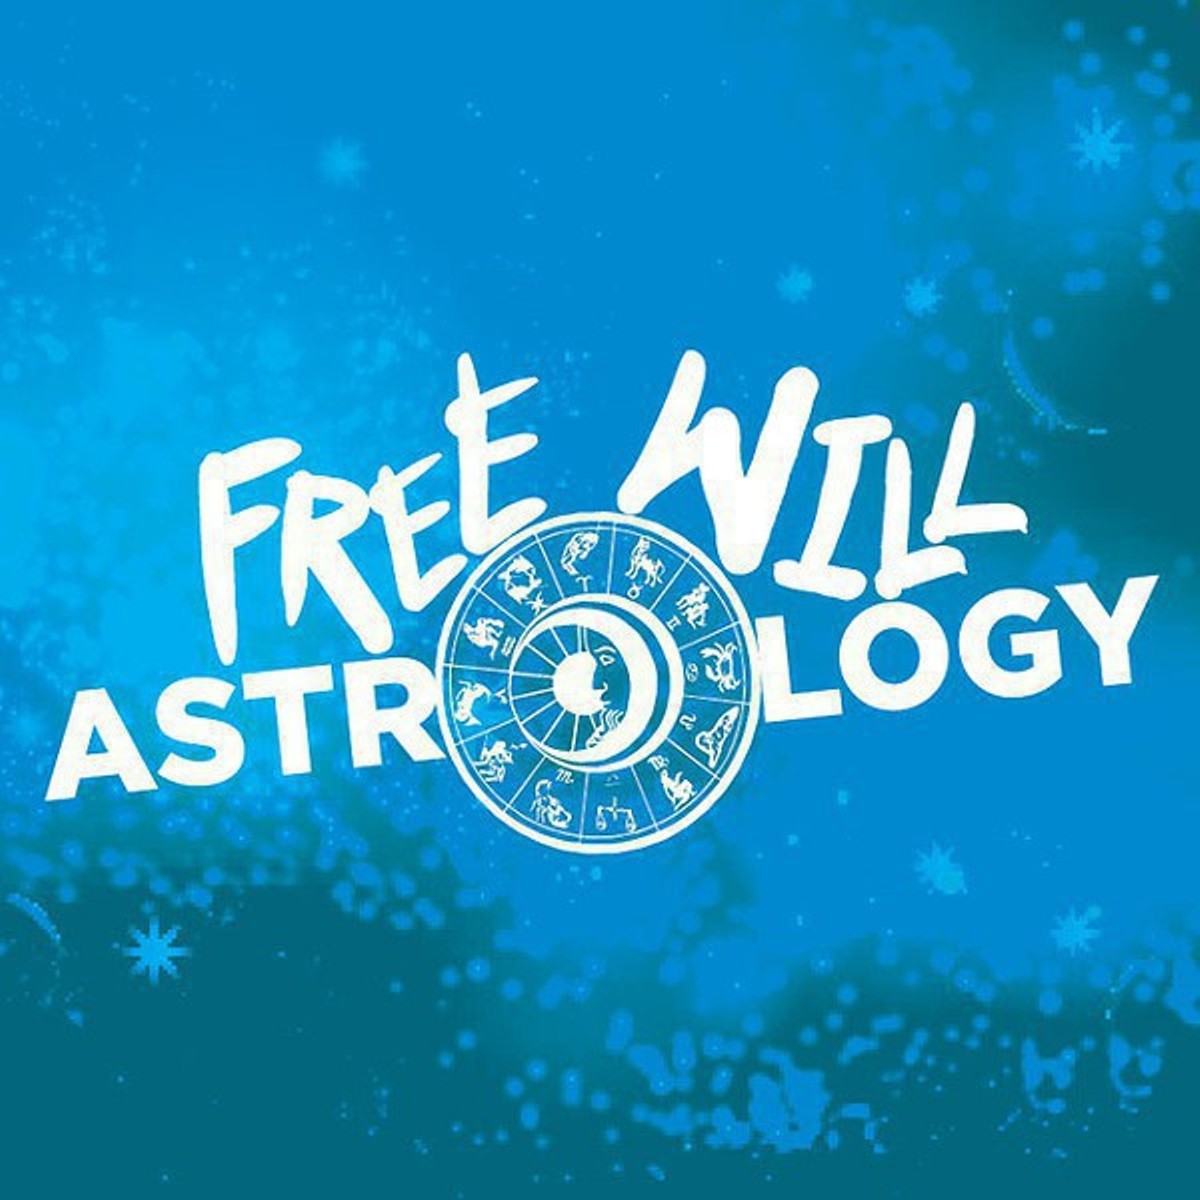 Free Will Astrology (4/13/16)